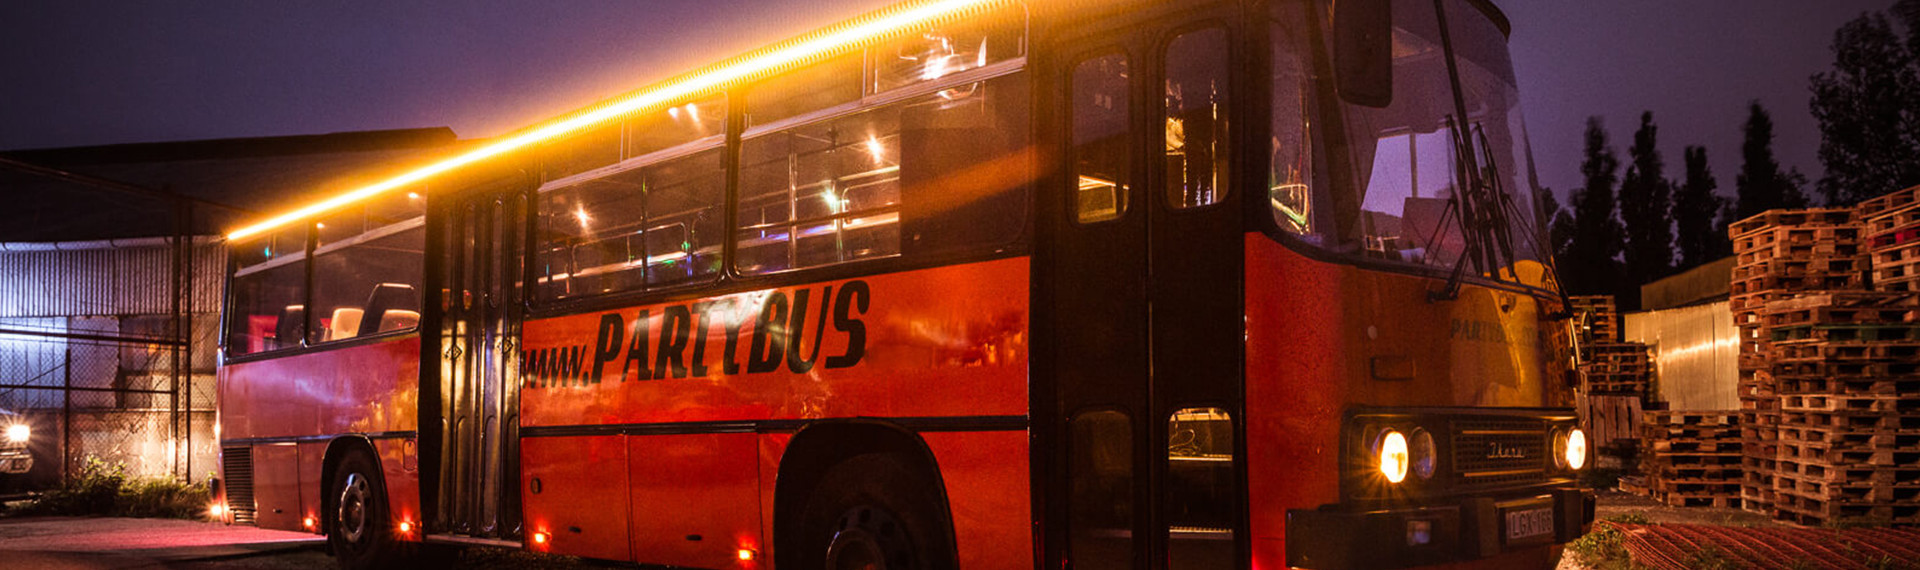 Party Bus in Amsterdam | Pissup